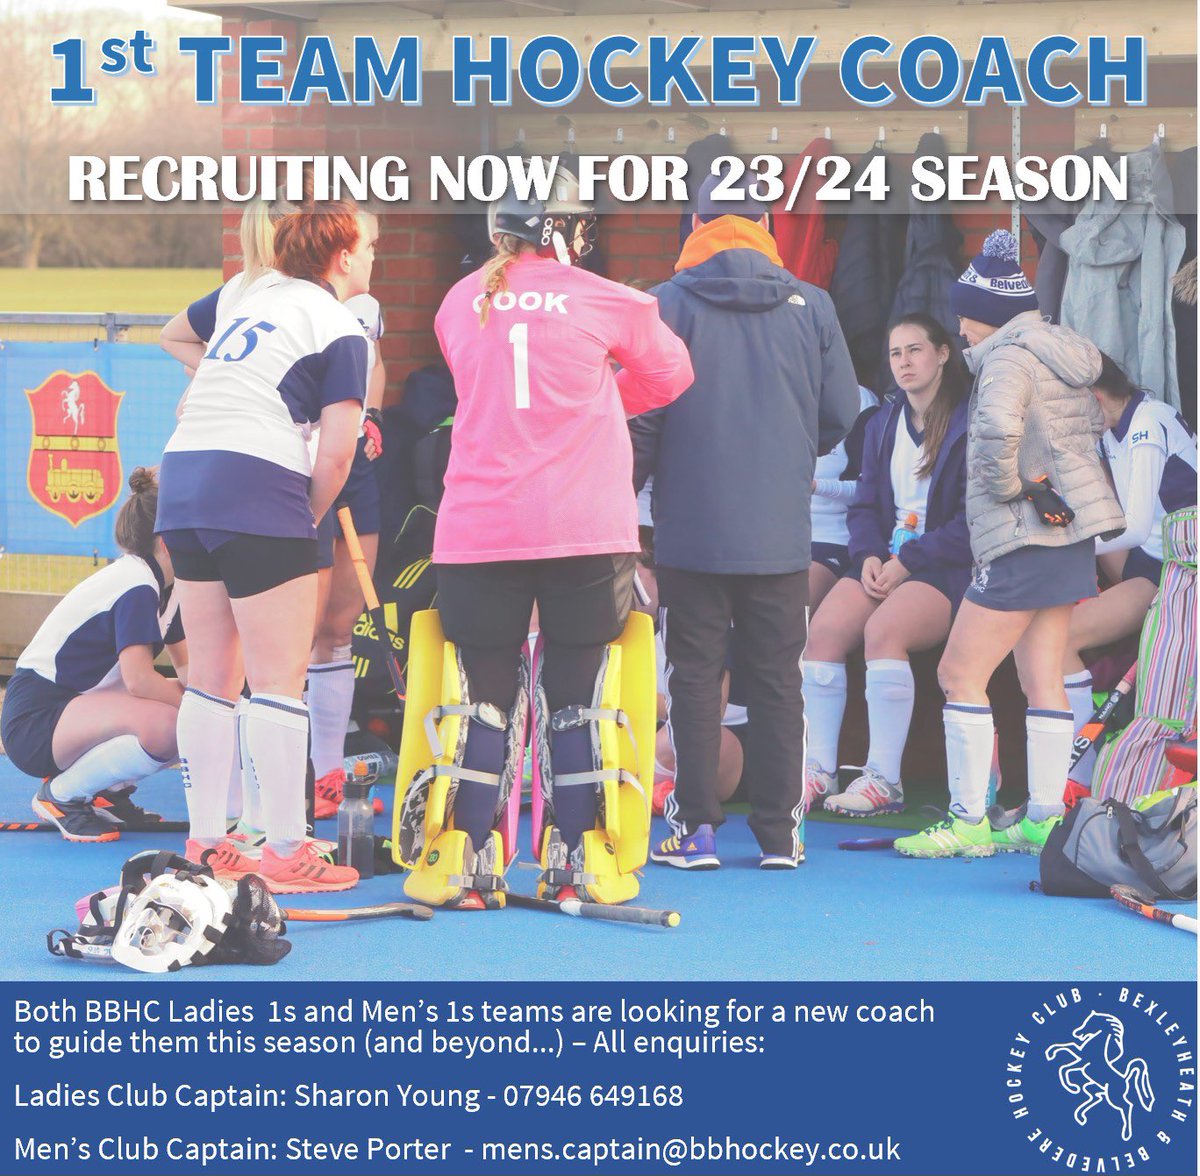 📣1ST TEAM HOCKEY COACHES📣

BBHC is looking for a Men's 1st Team Coach & a Ladies Coach for the 23/24 season. 

#hockey #southeasthockey #englandhockey #bbhockey #bexleyheath #bexley #belvedere #hockeycoach #hockeycoaching